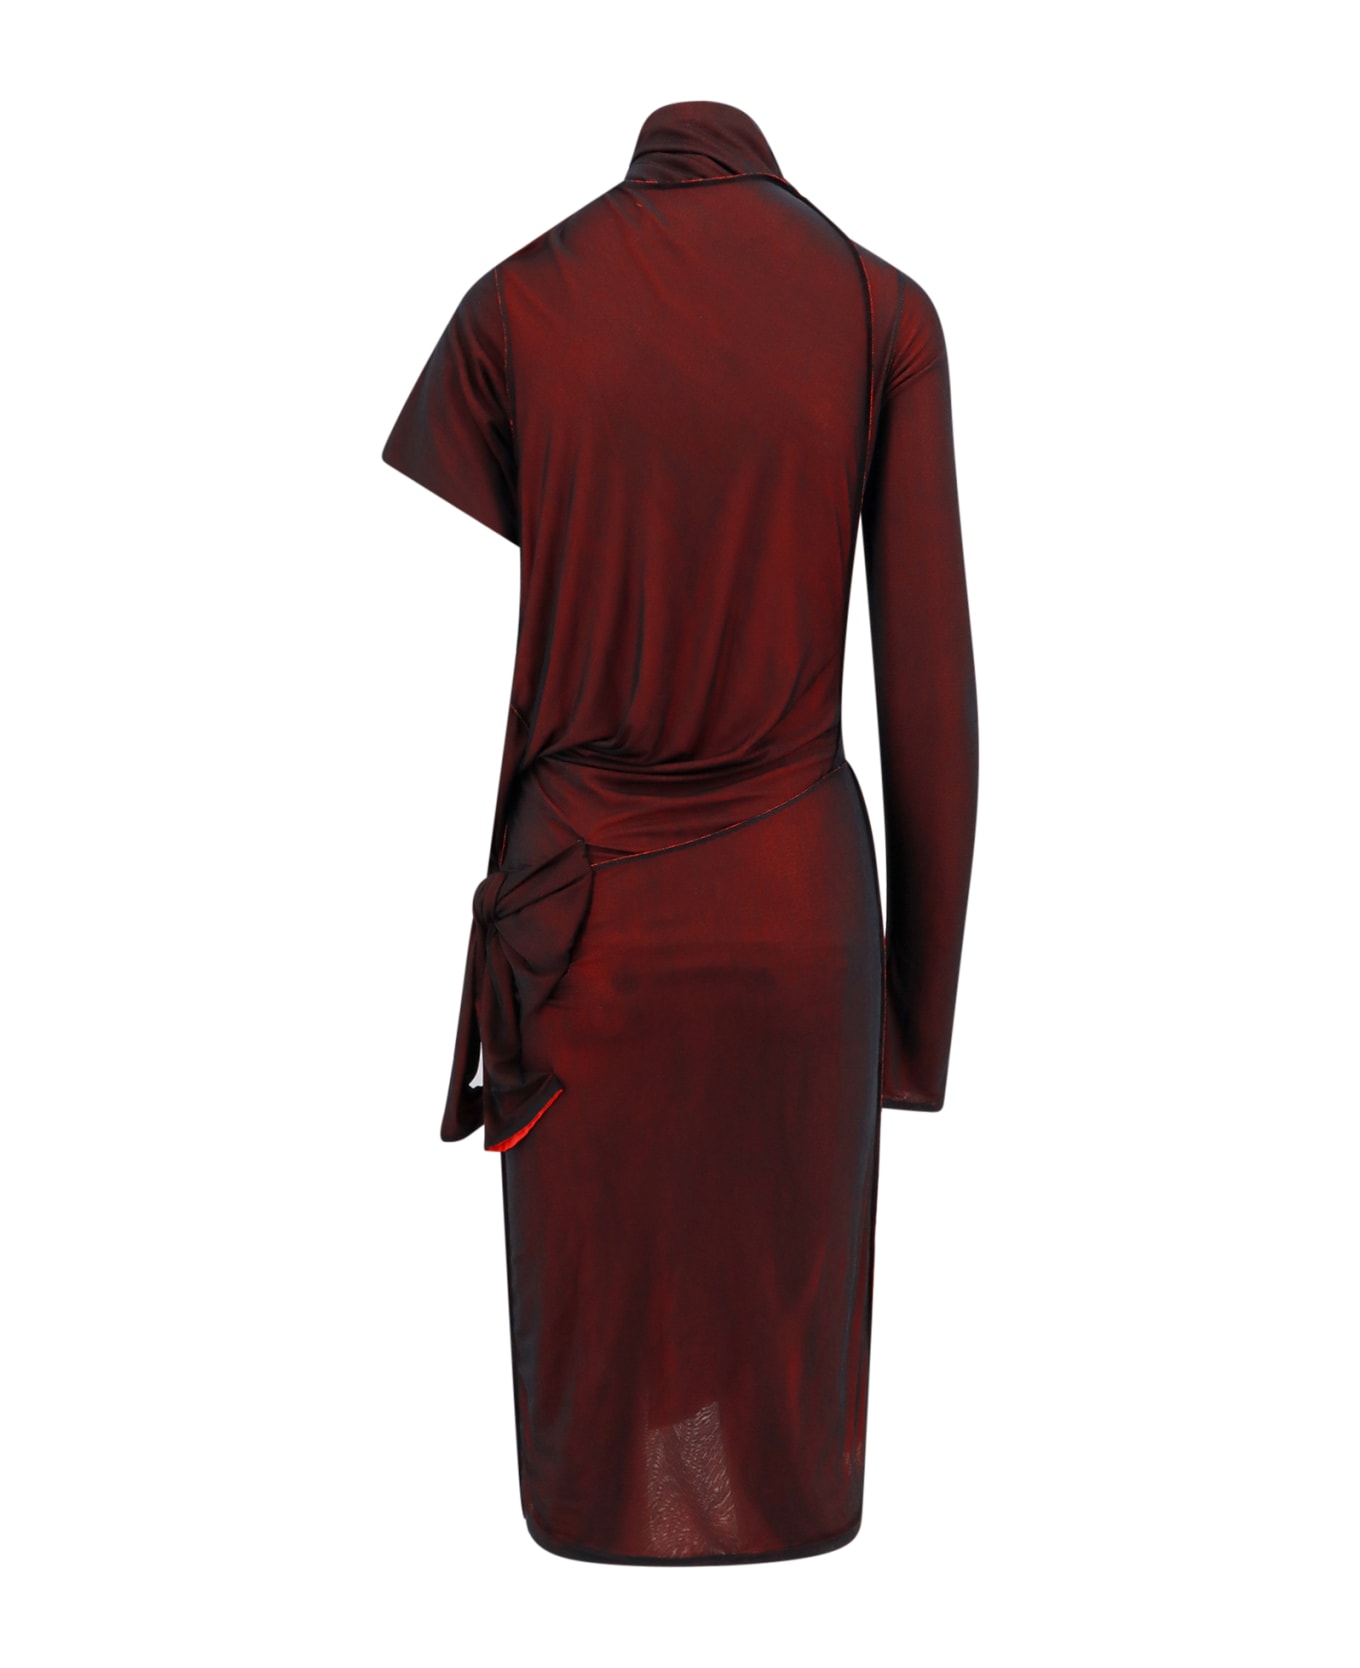 Maison Margiela Viscose Dress With Asymmetric Sleeves - Red